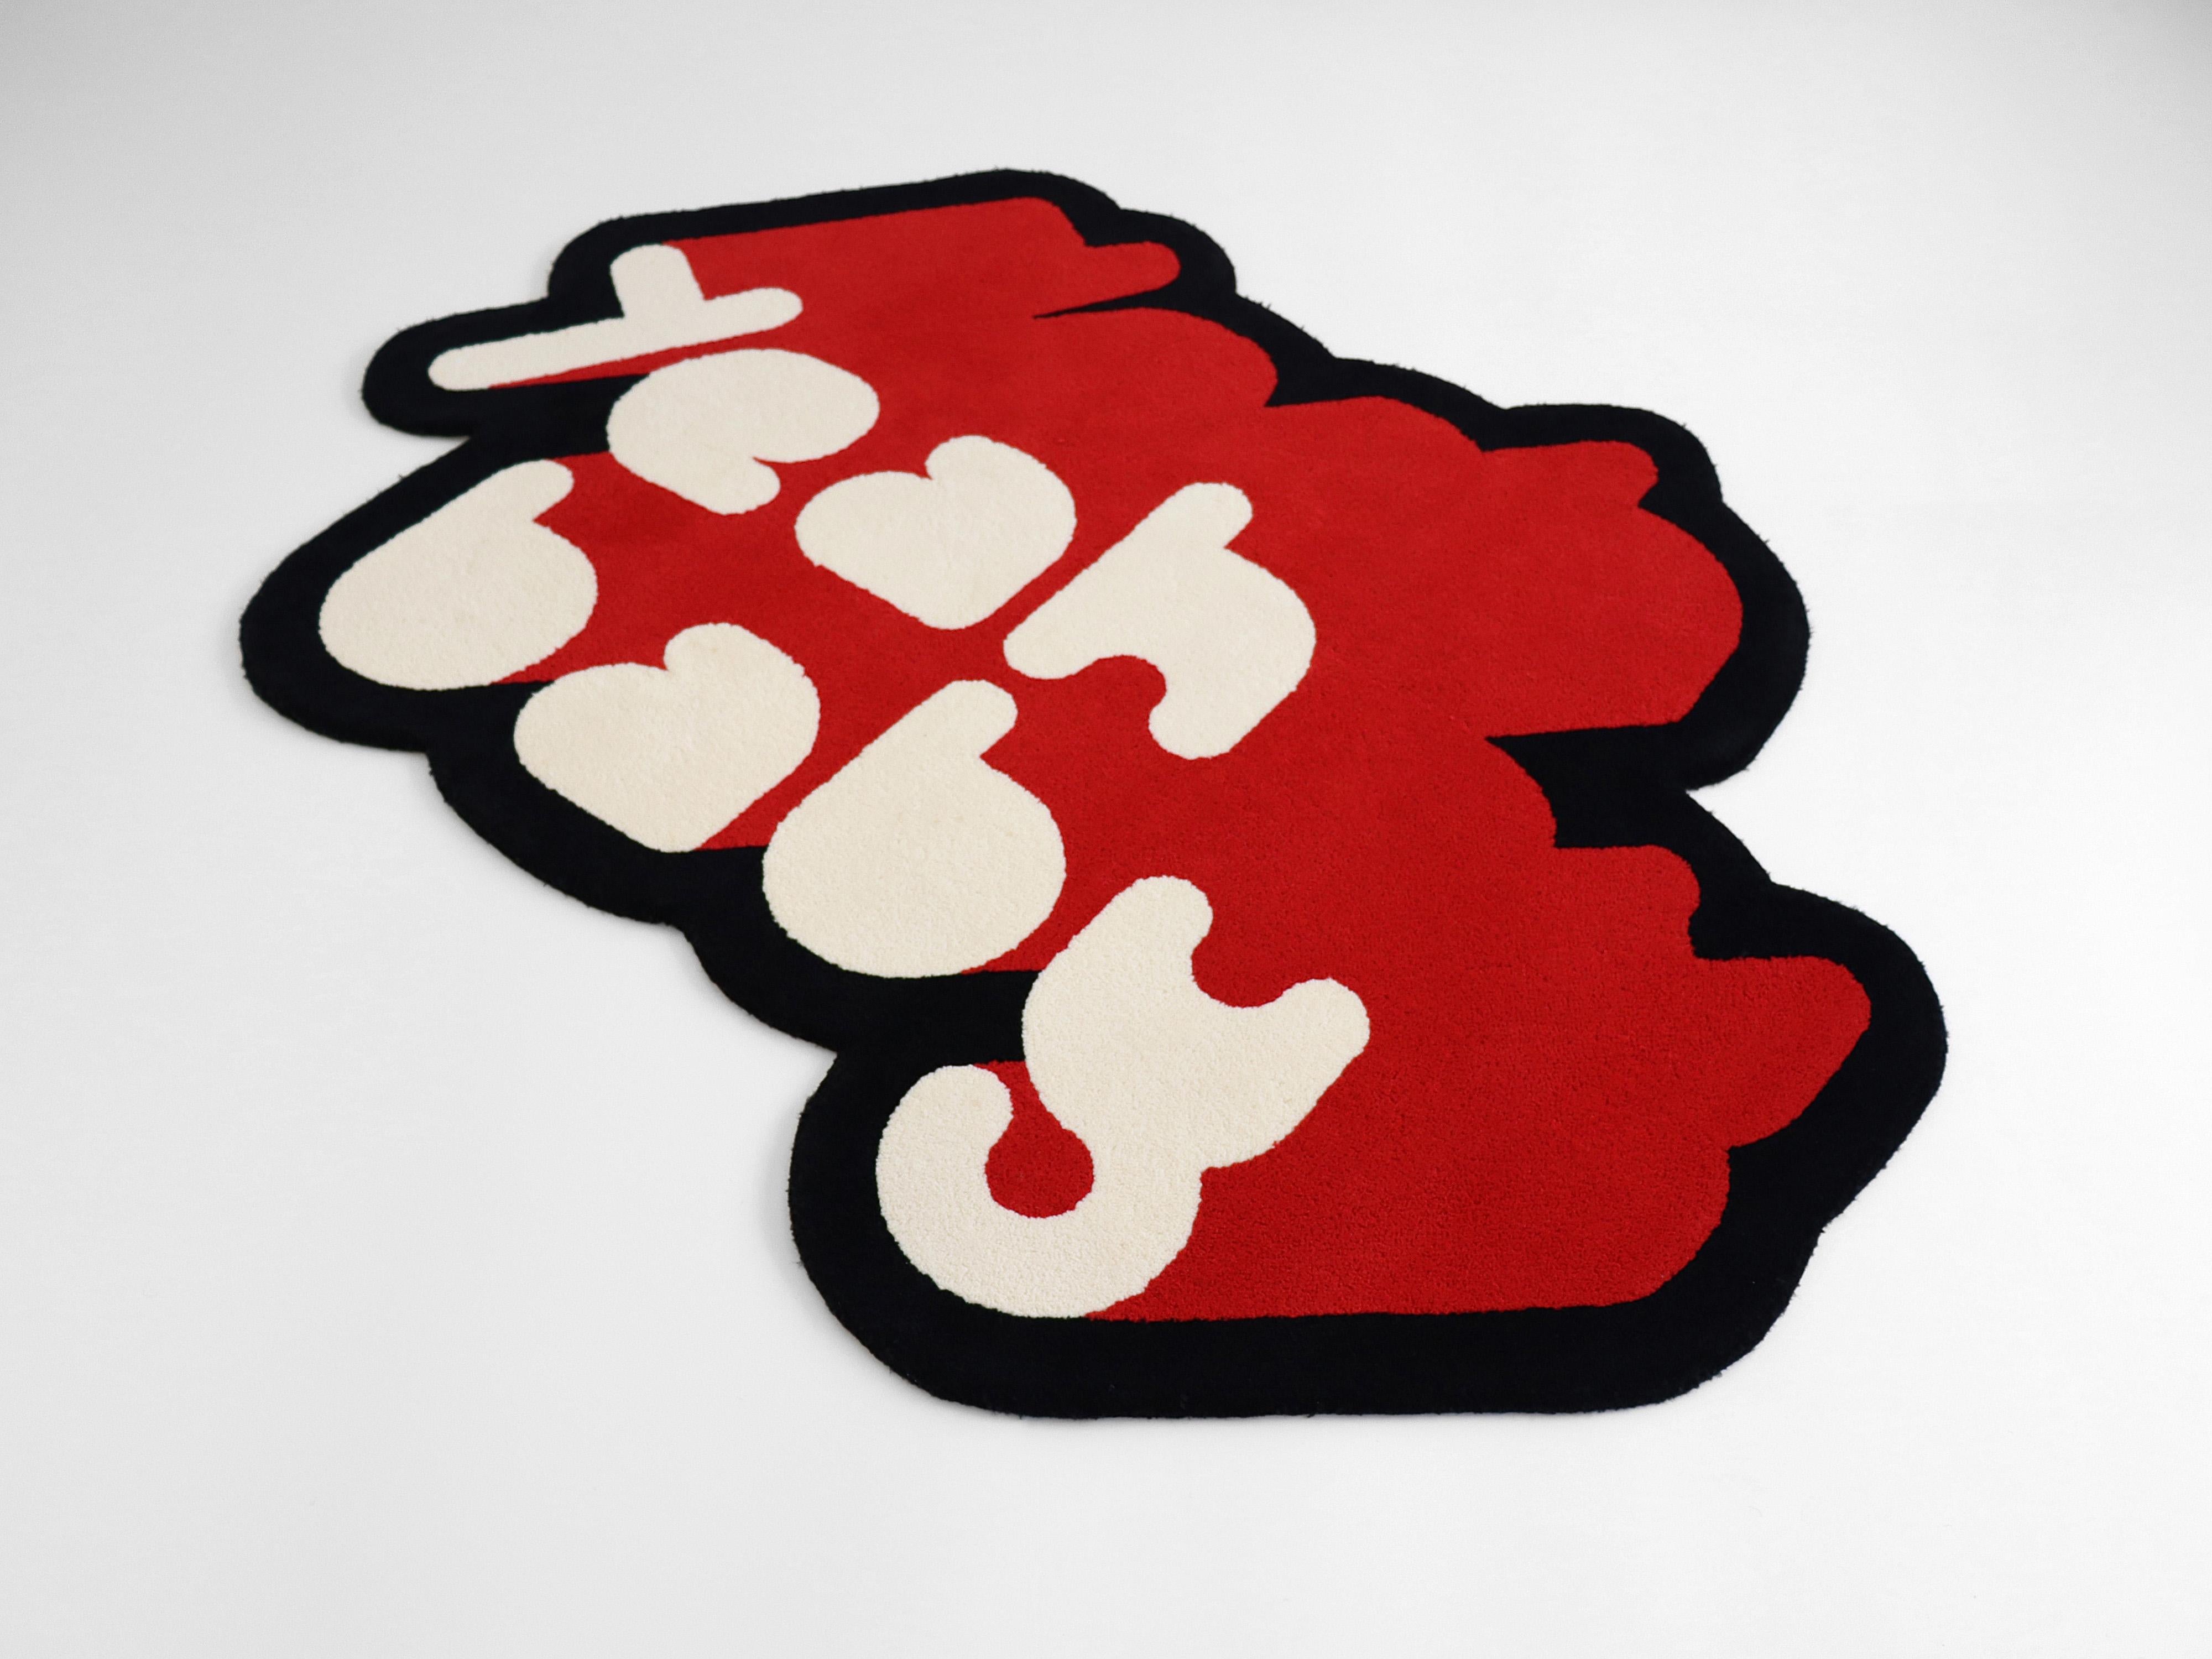 Red, White and Black Yeah Baby Rug from Graffiti Collection by Paulo Kobylka For Sale 1